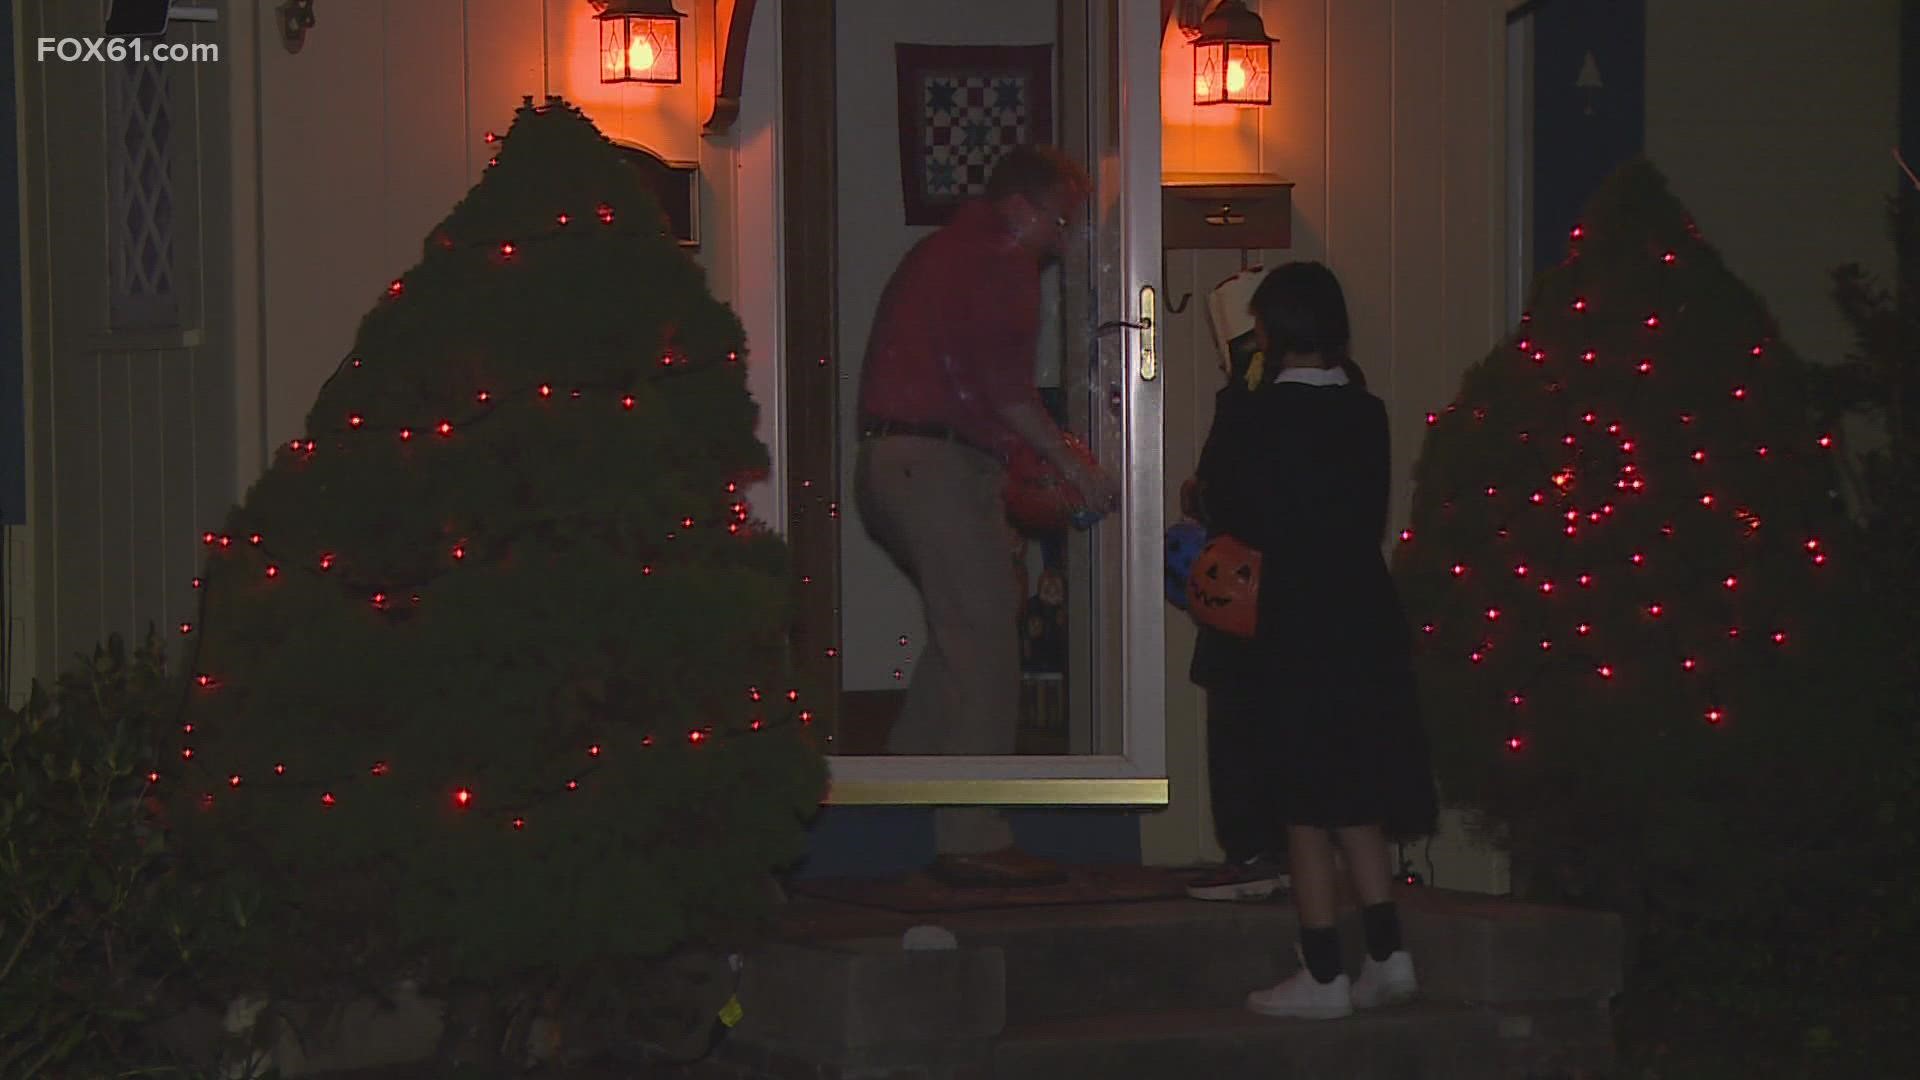 Halloween night Monday brought kids across the state out in their best costumes to do some trick-or-treating in their neighborhoods.